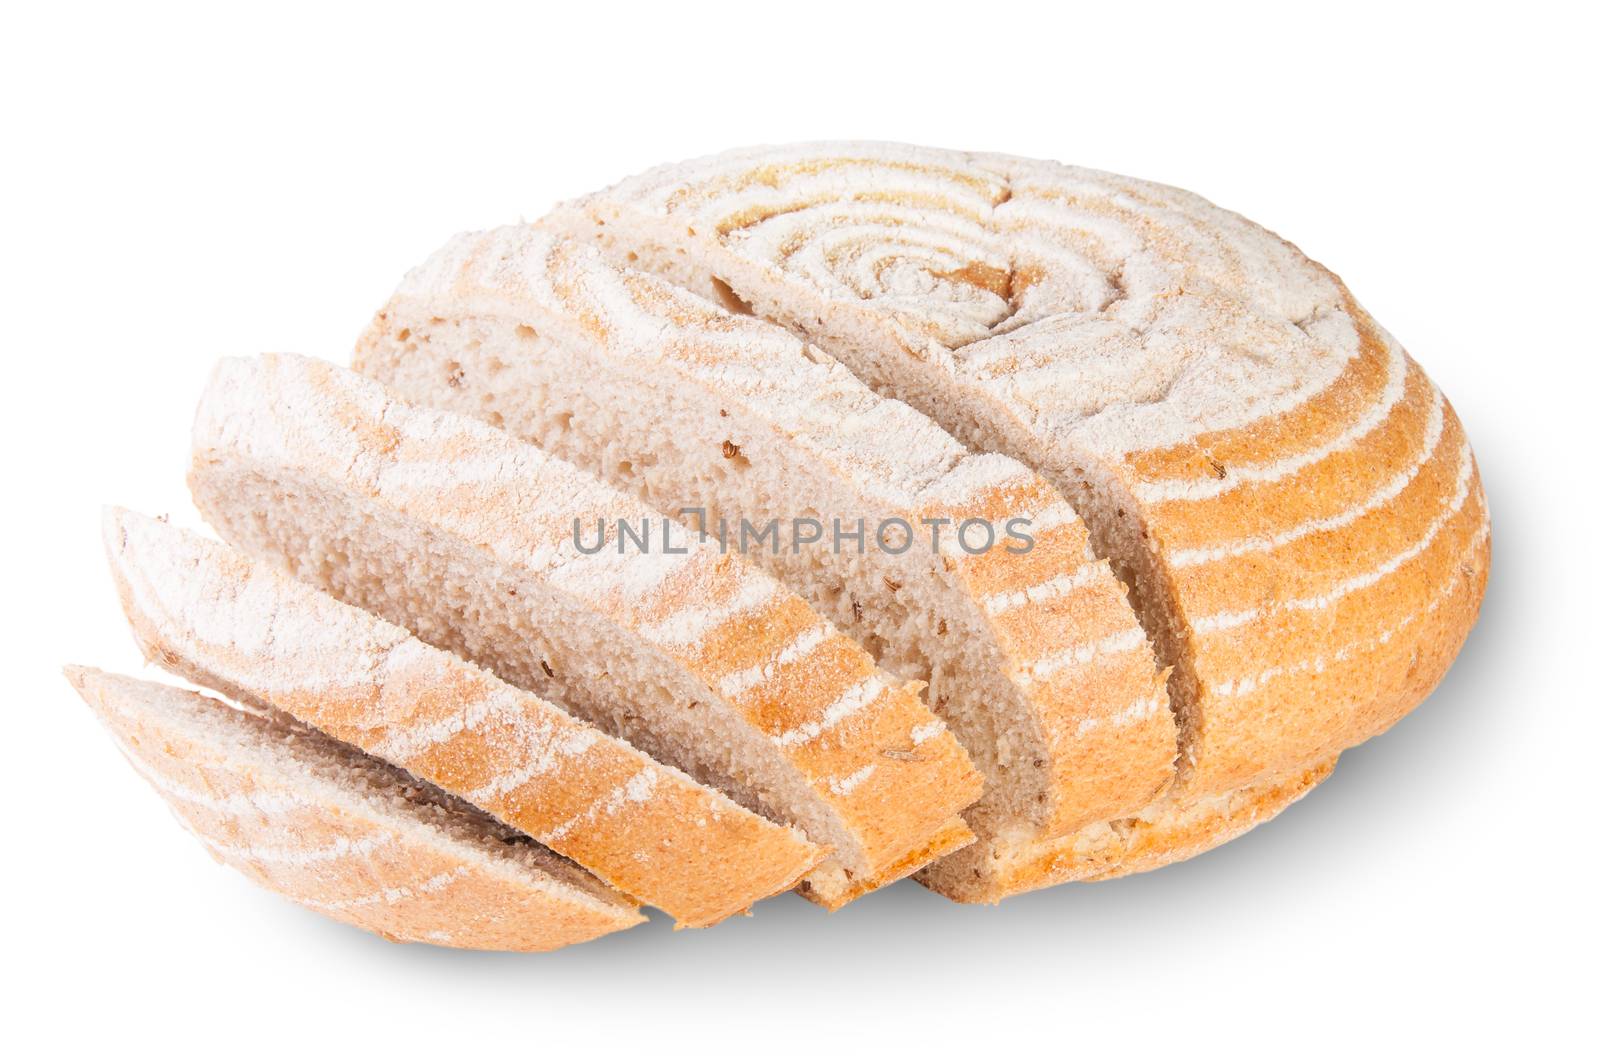 Unleavened Bread With Dill Seeds Isolated On White Background